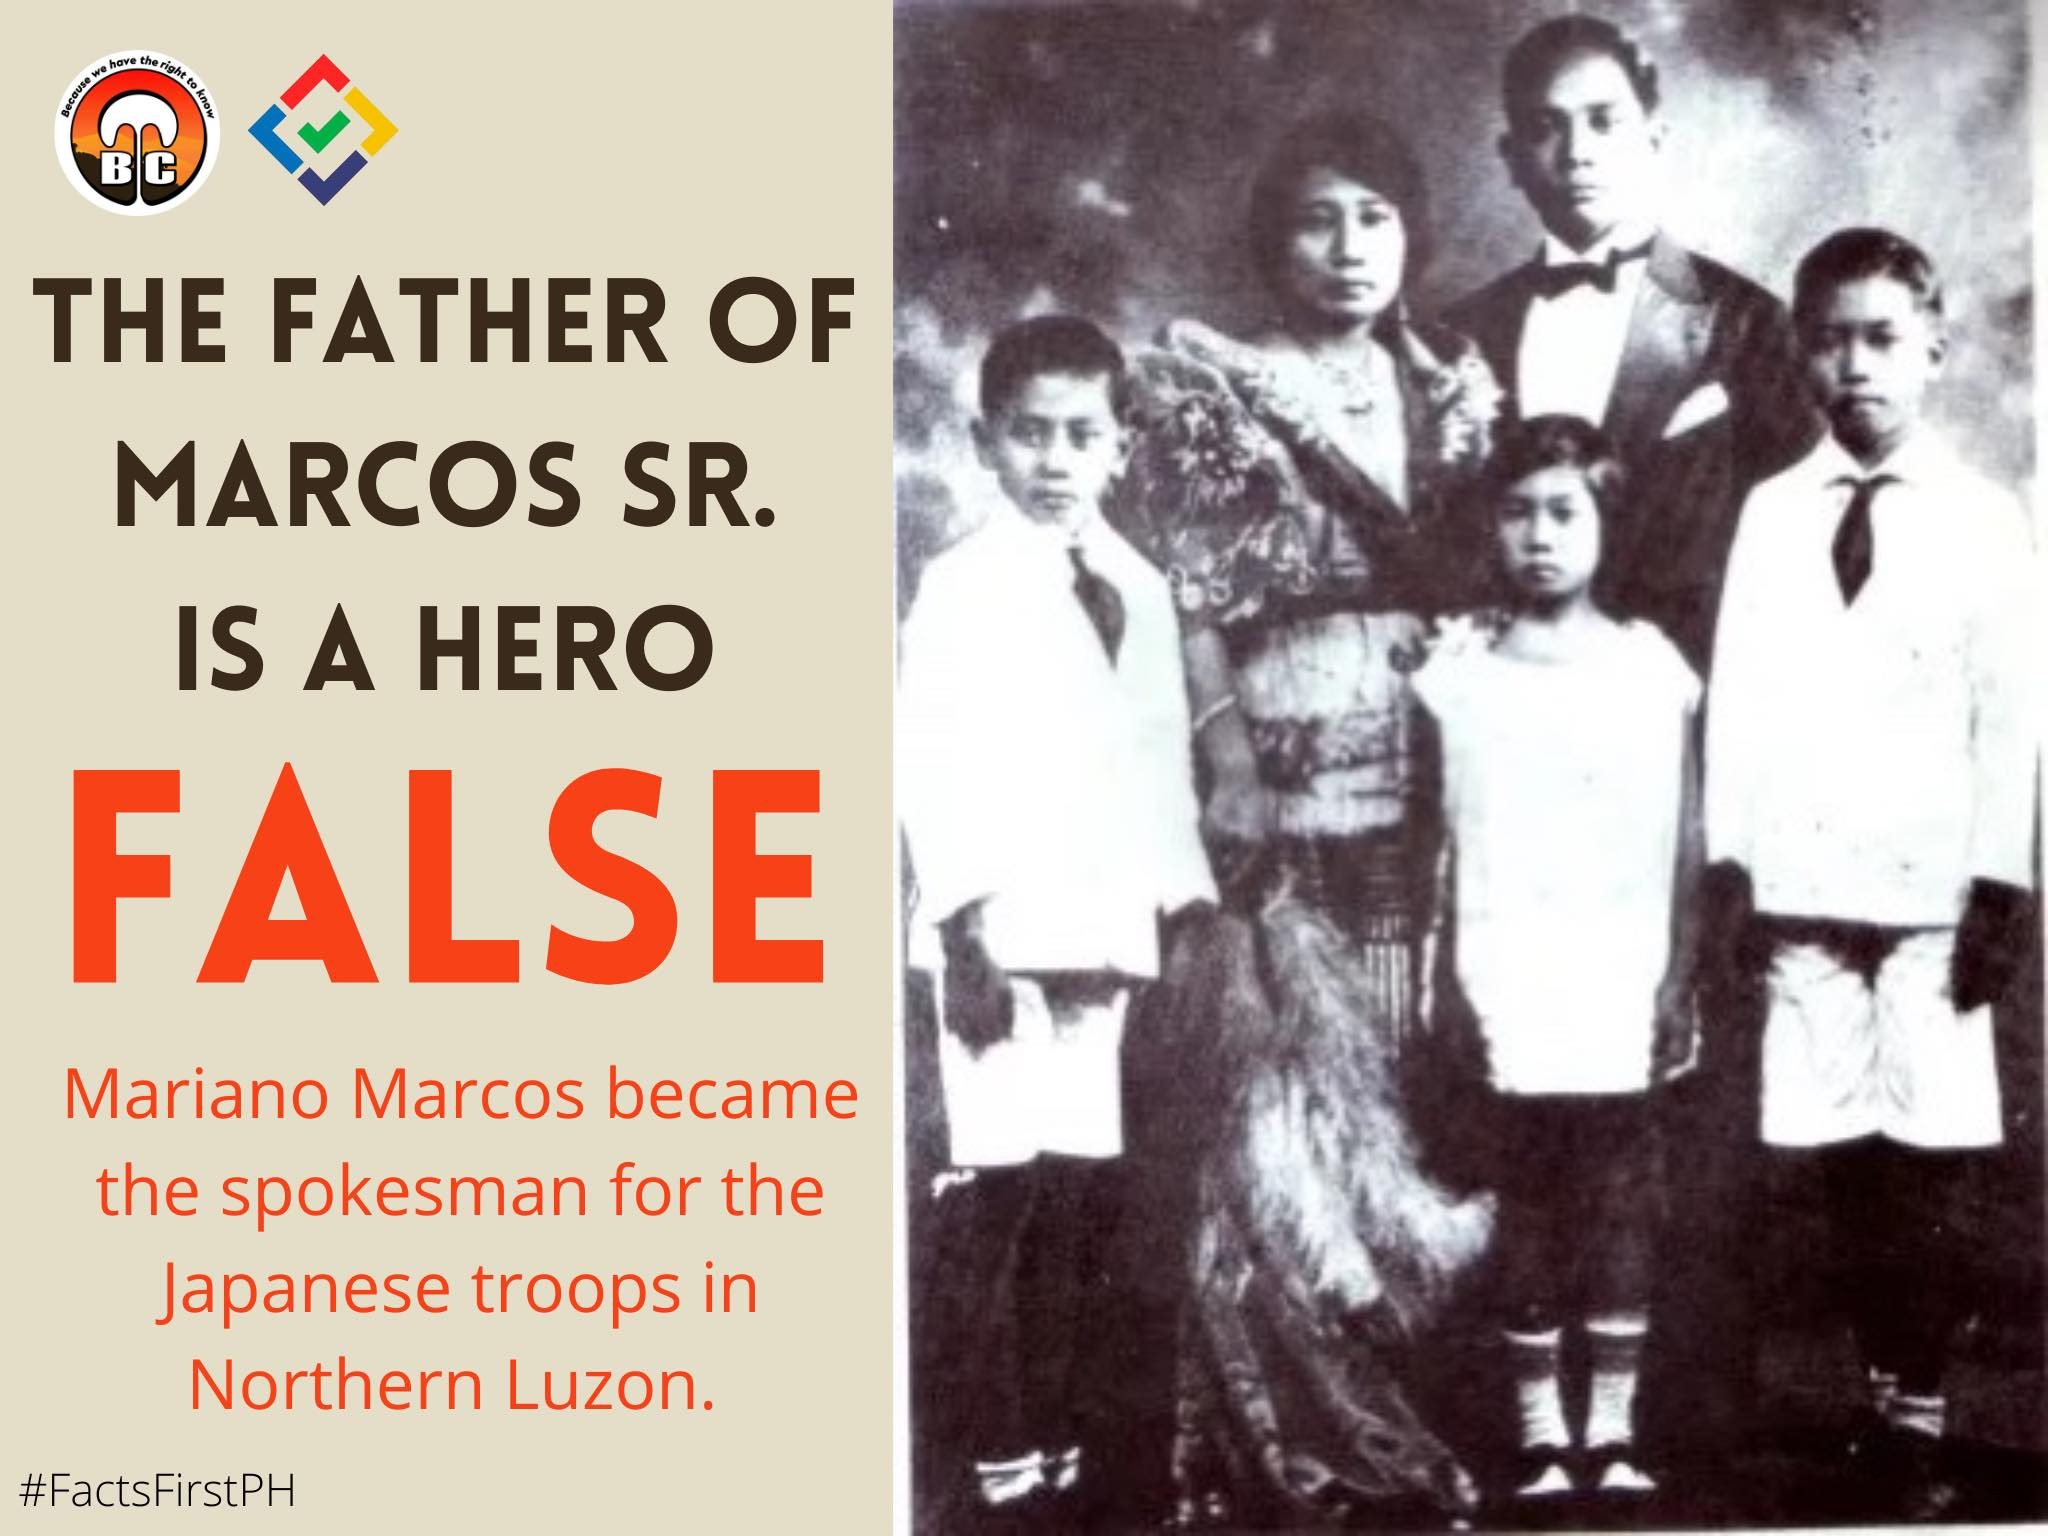 FACT CHECK – The father of Marcos Sr. is a hero